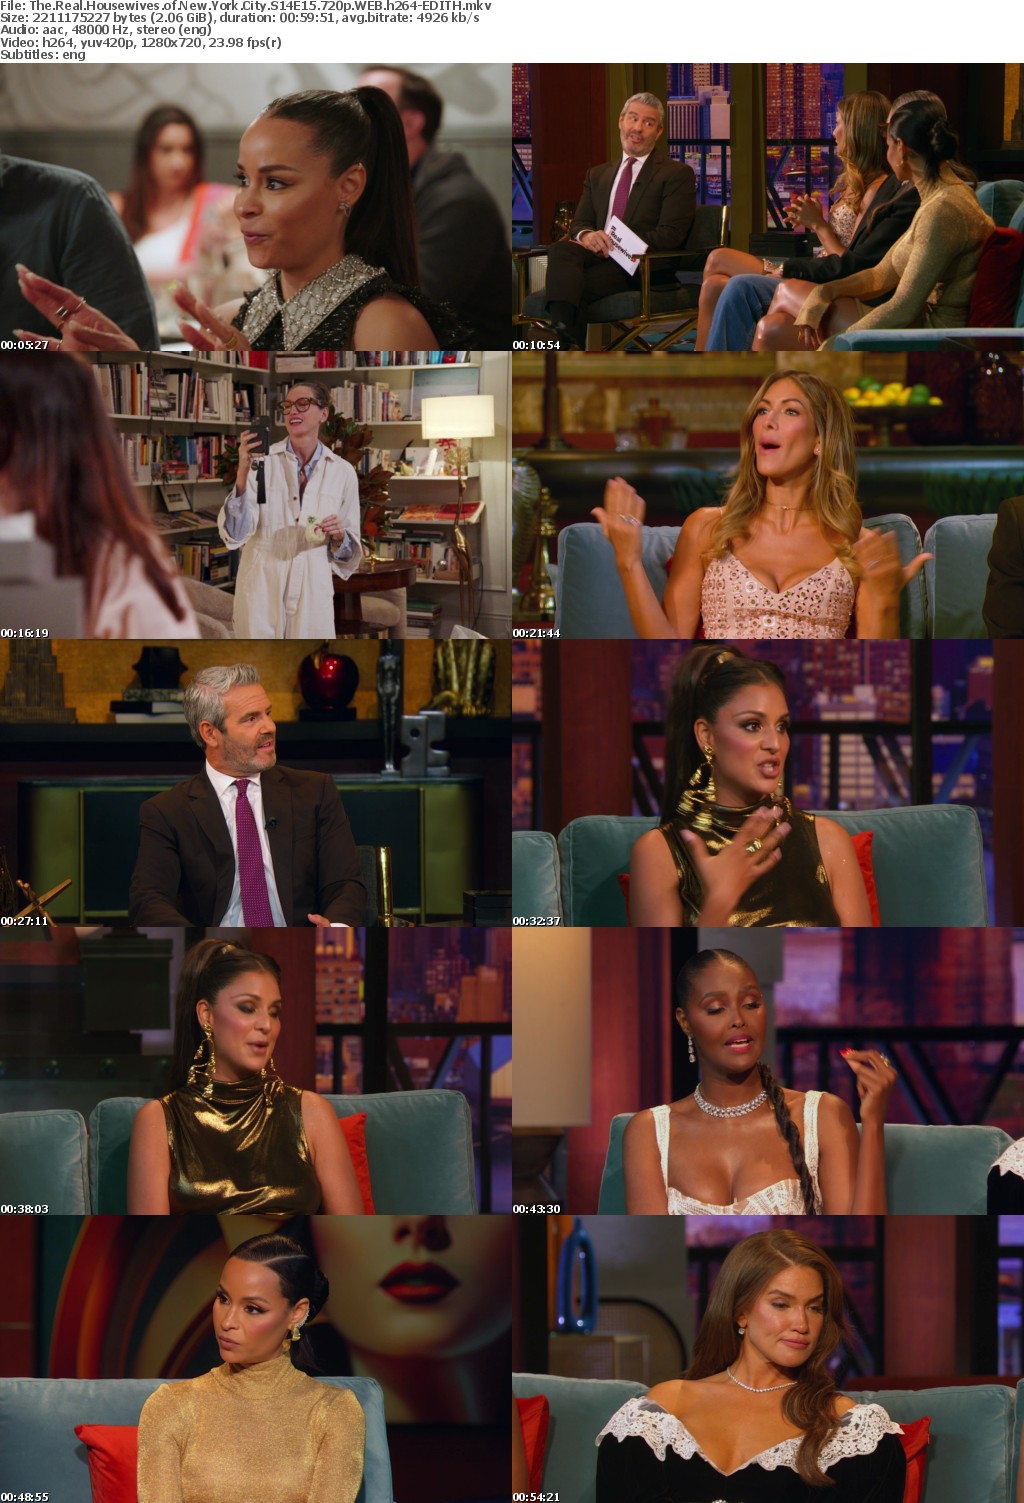 The Real Housewives of New York City S14E15 720p WEB h264-EDITH